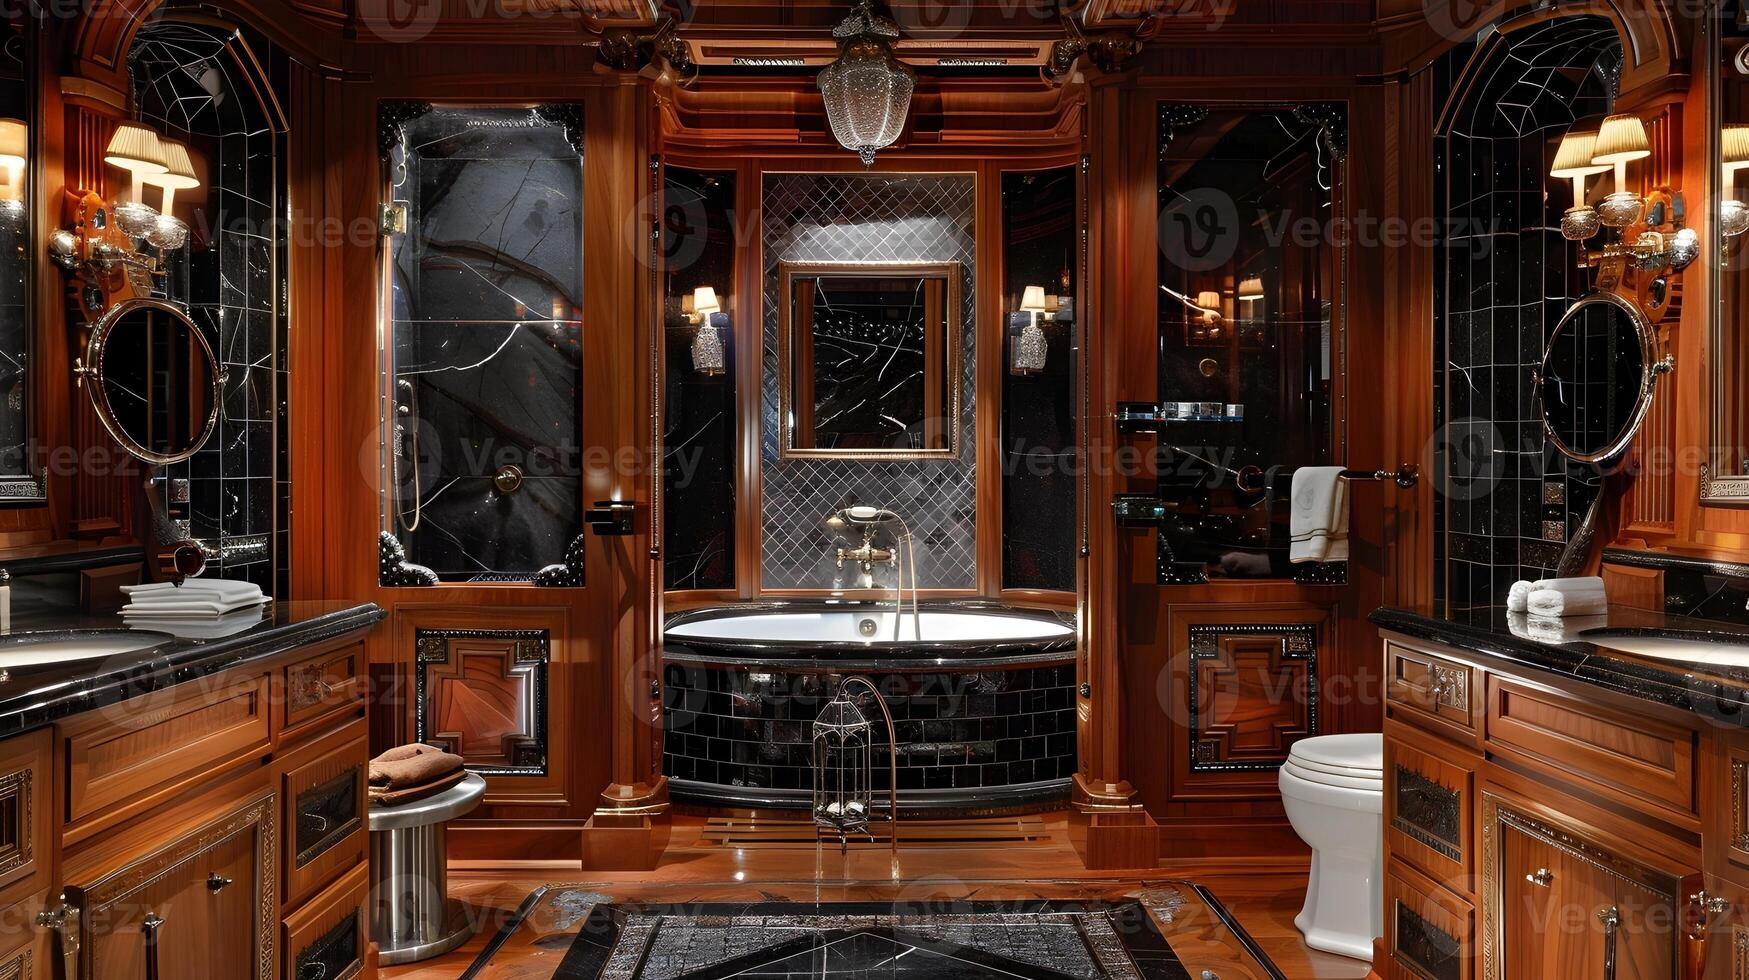 Ornate Woodwork and Marble Accents - A Lavish Bathroom Exuding Old World Elegance photo